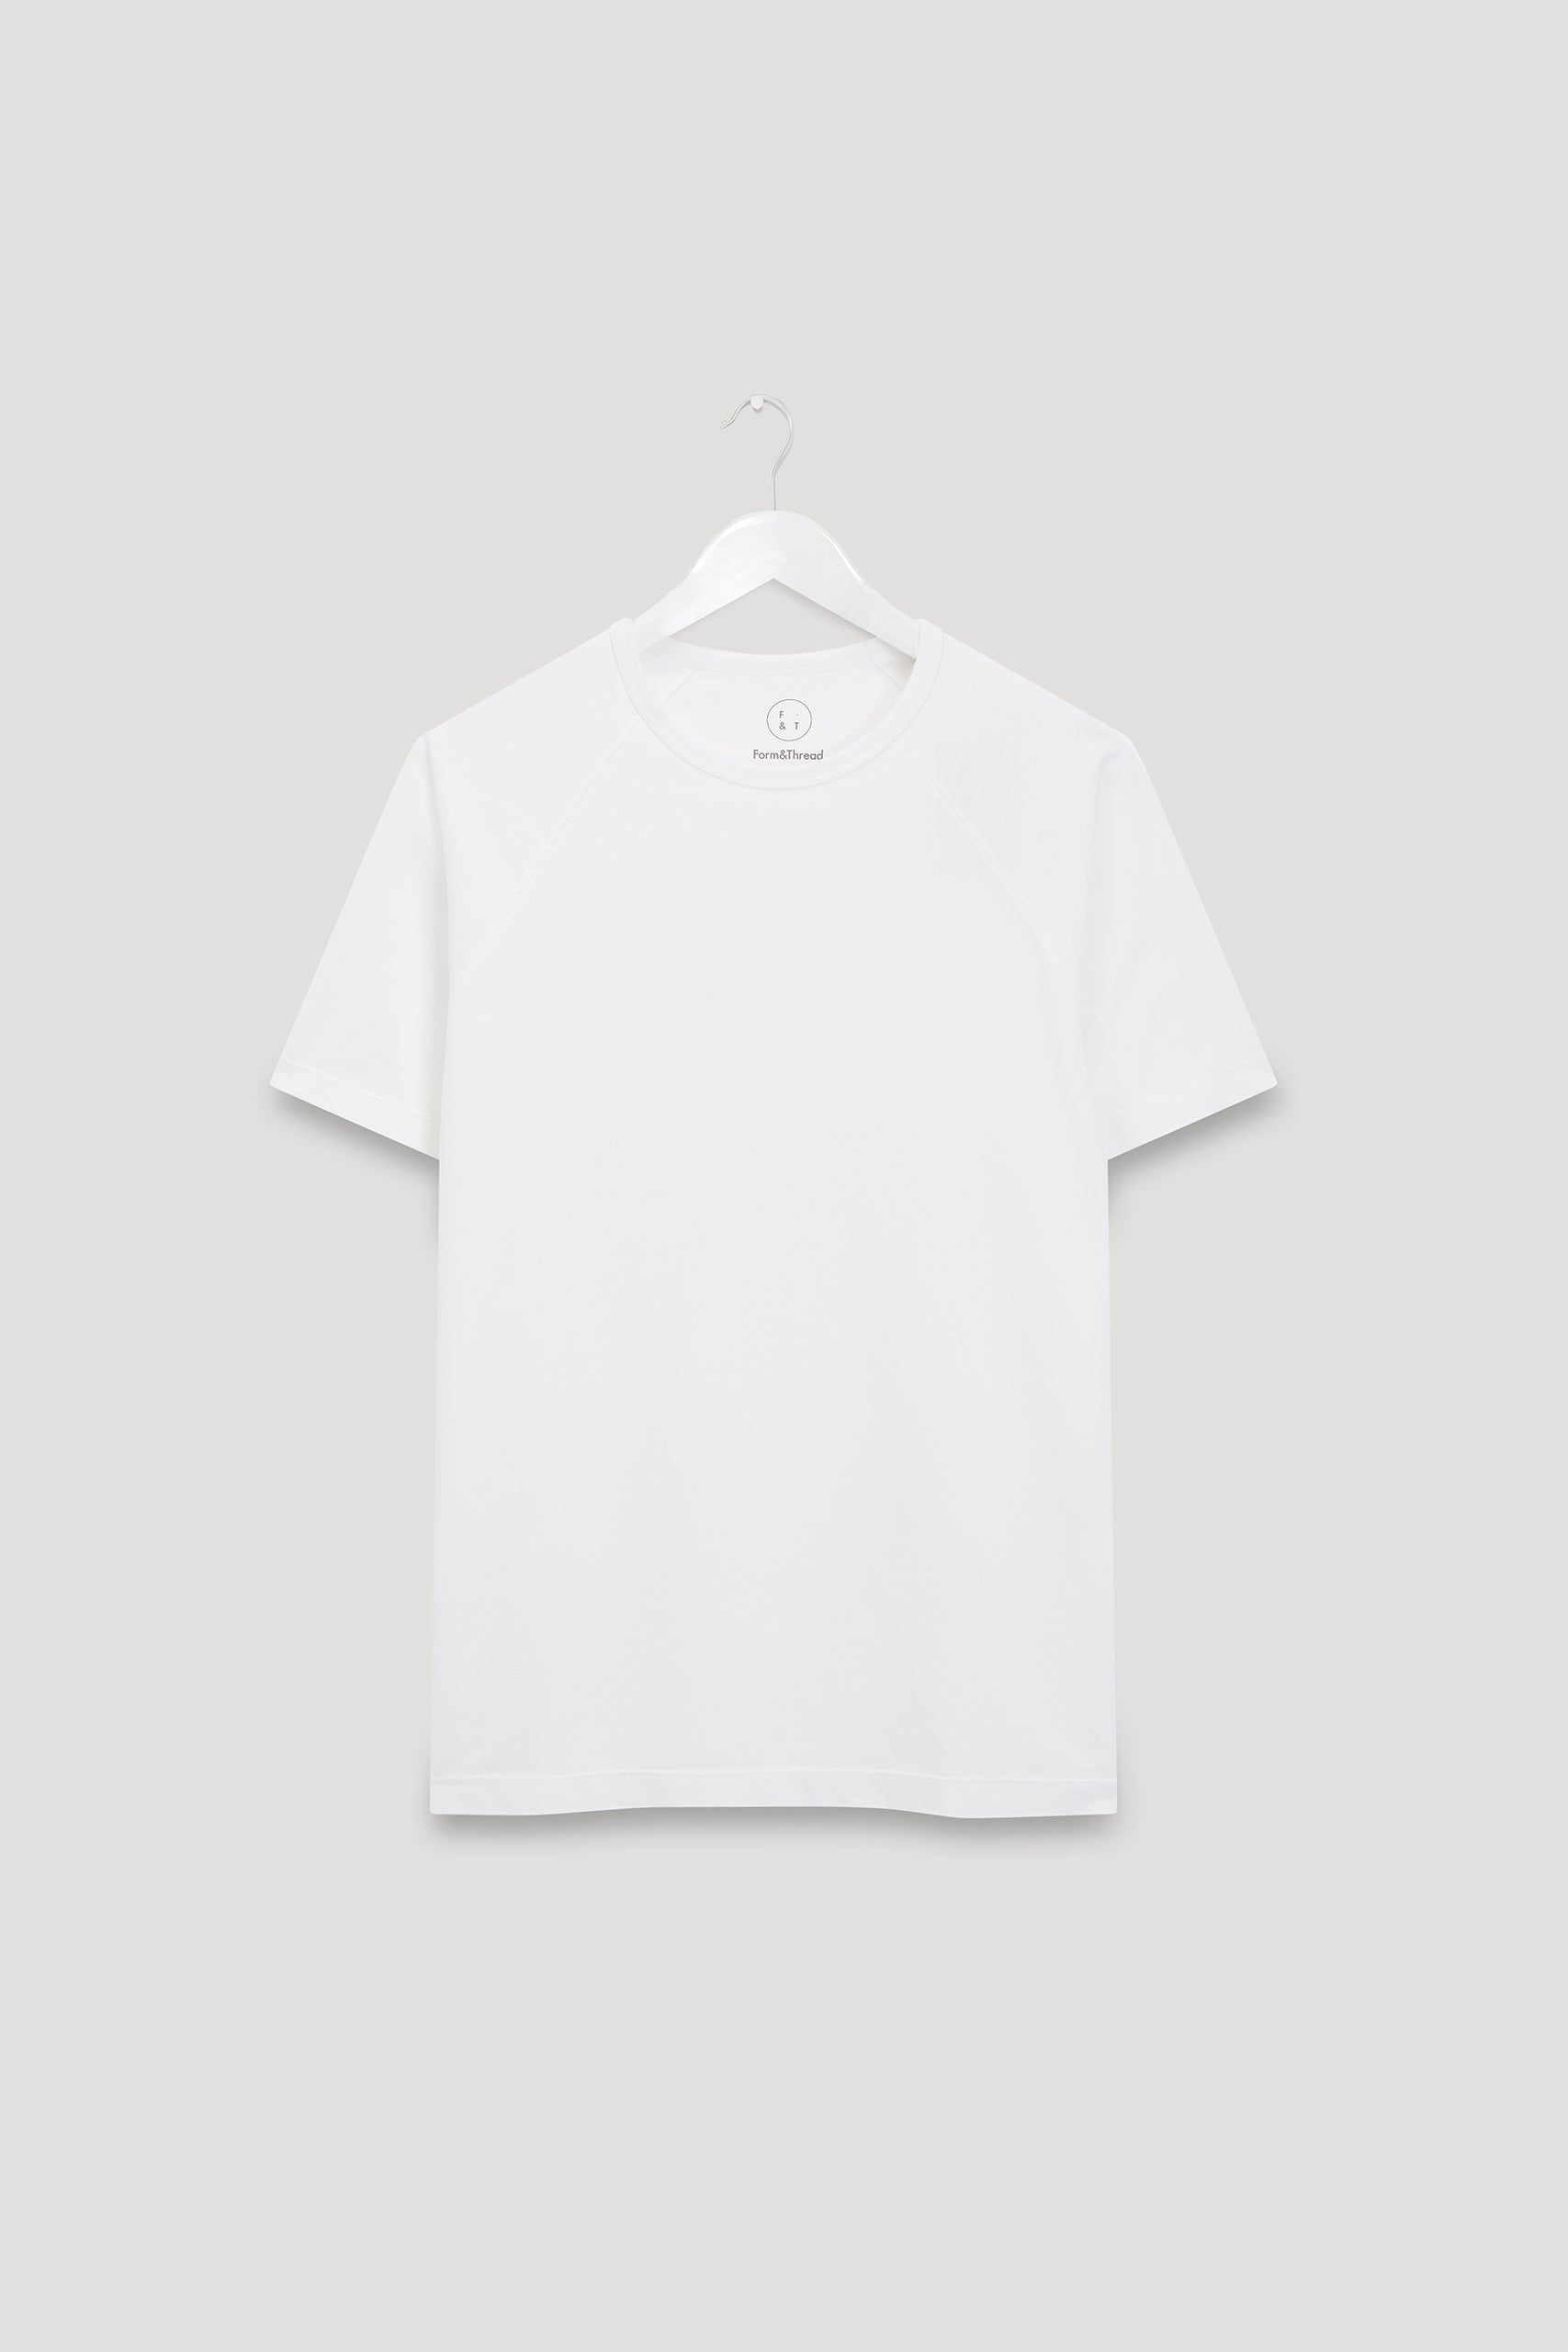 Raglan T Shirt - Timeless. Ethical. Sustainable - F&T – Form&Thread